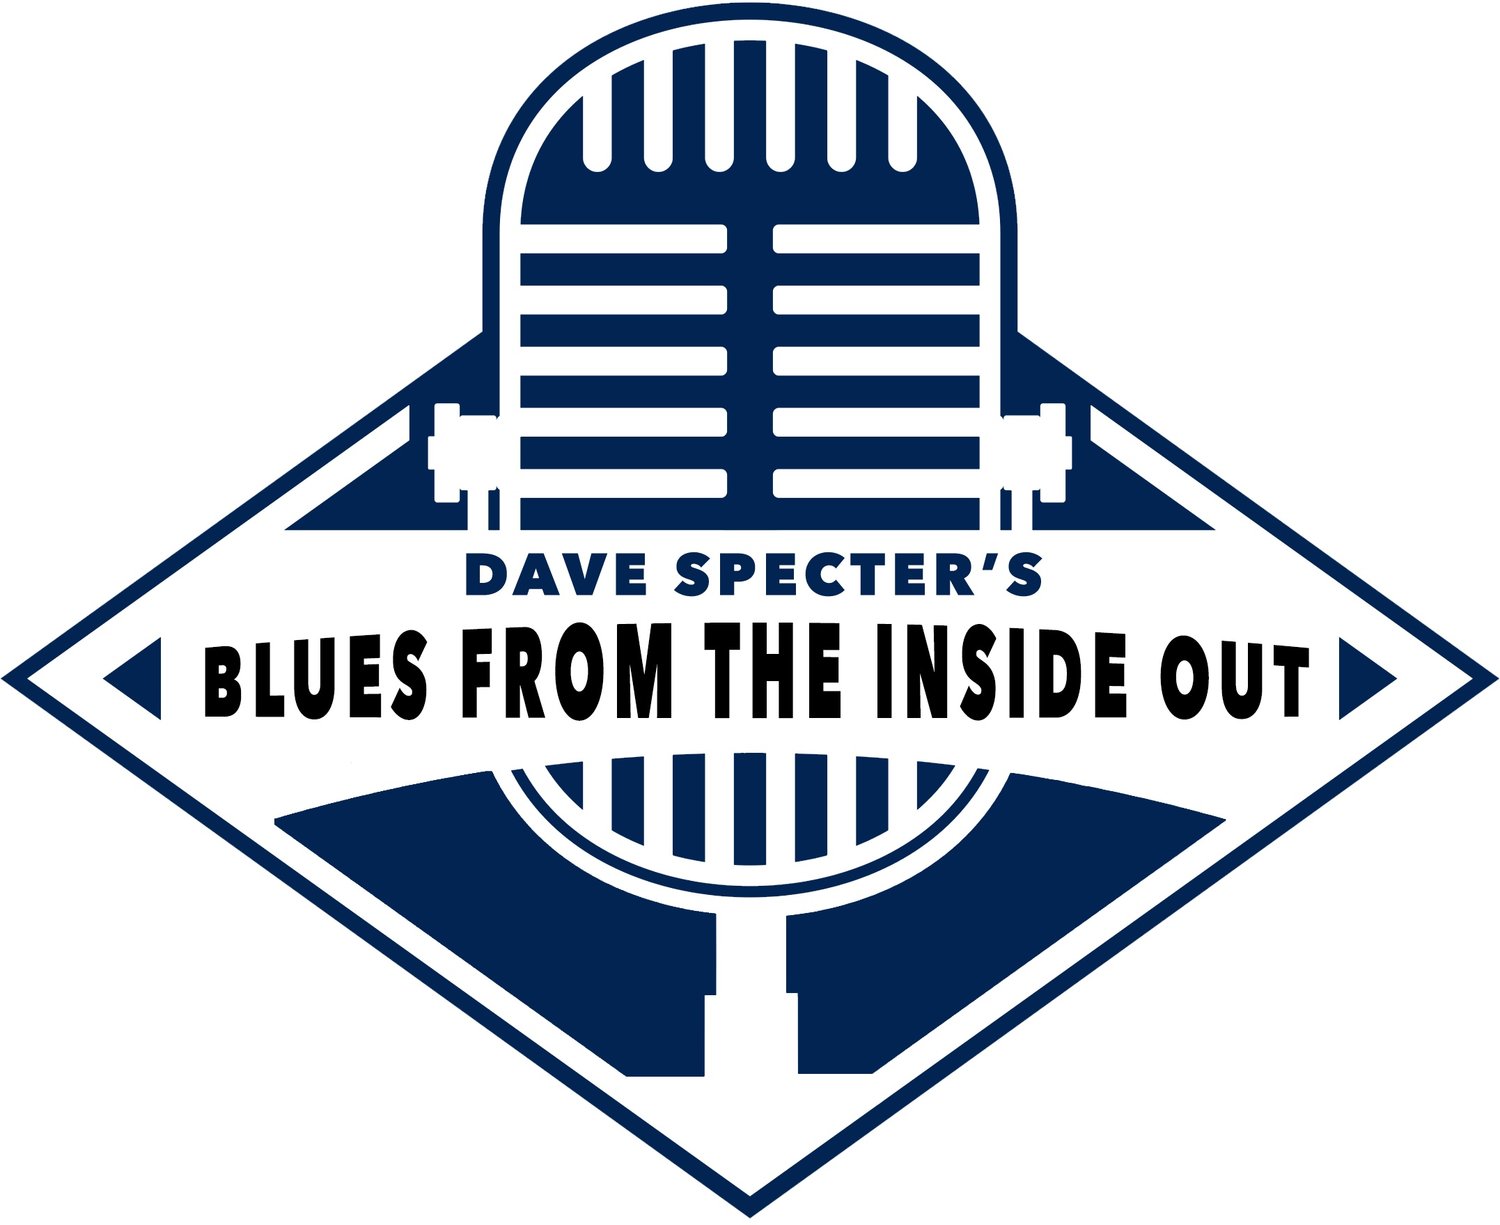 Dave Specter's Blues from the Inside Out